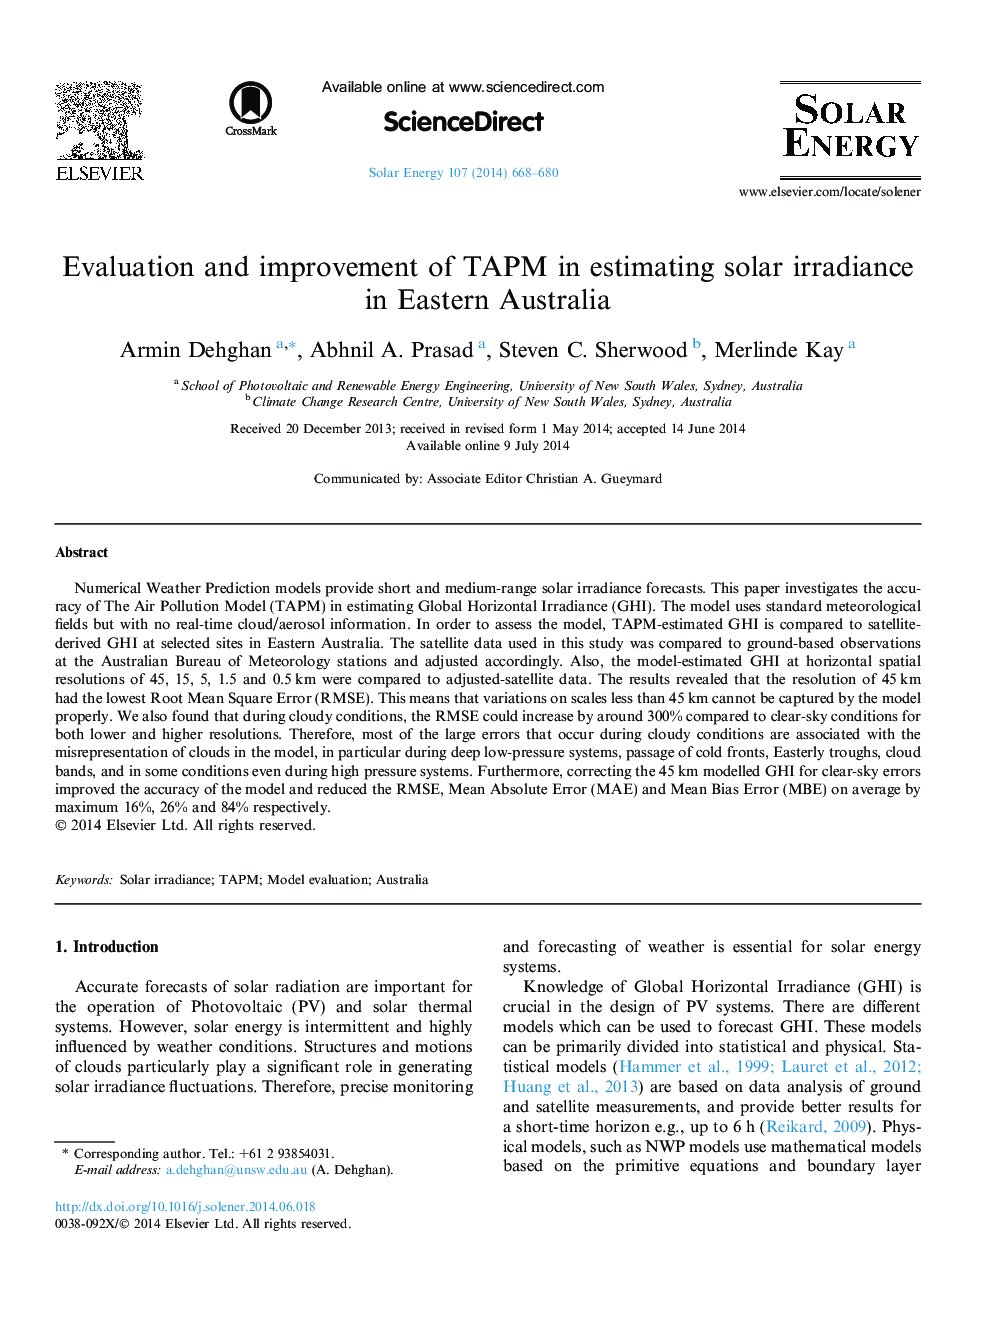 Evaluation and improvement of TAPM in estimating solar irradiance in Eastern Australia